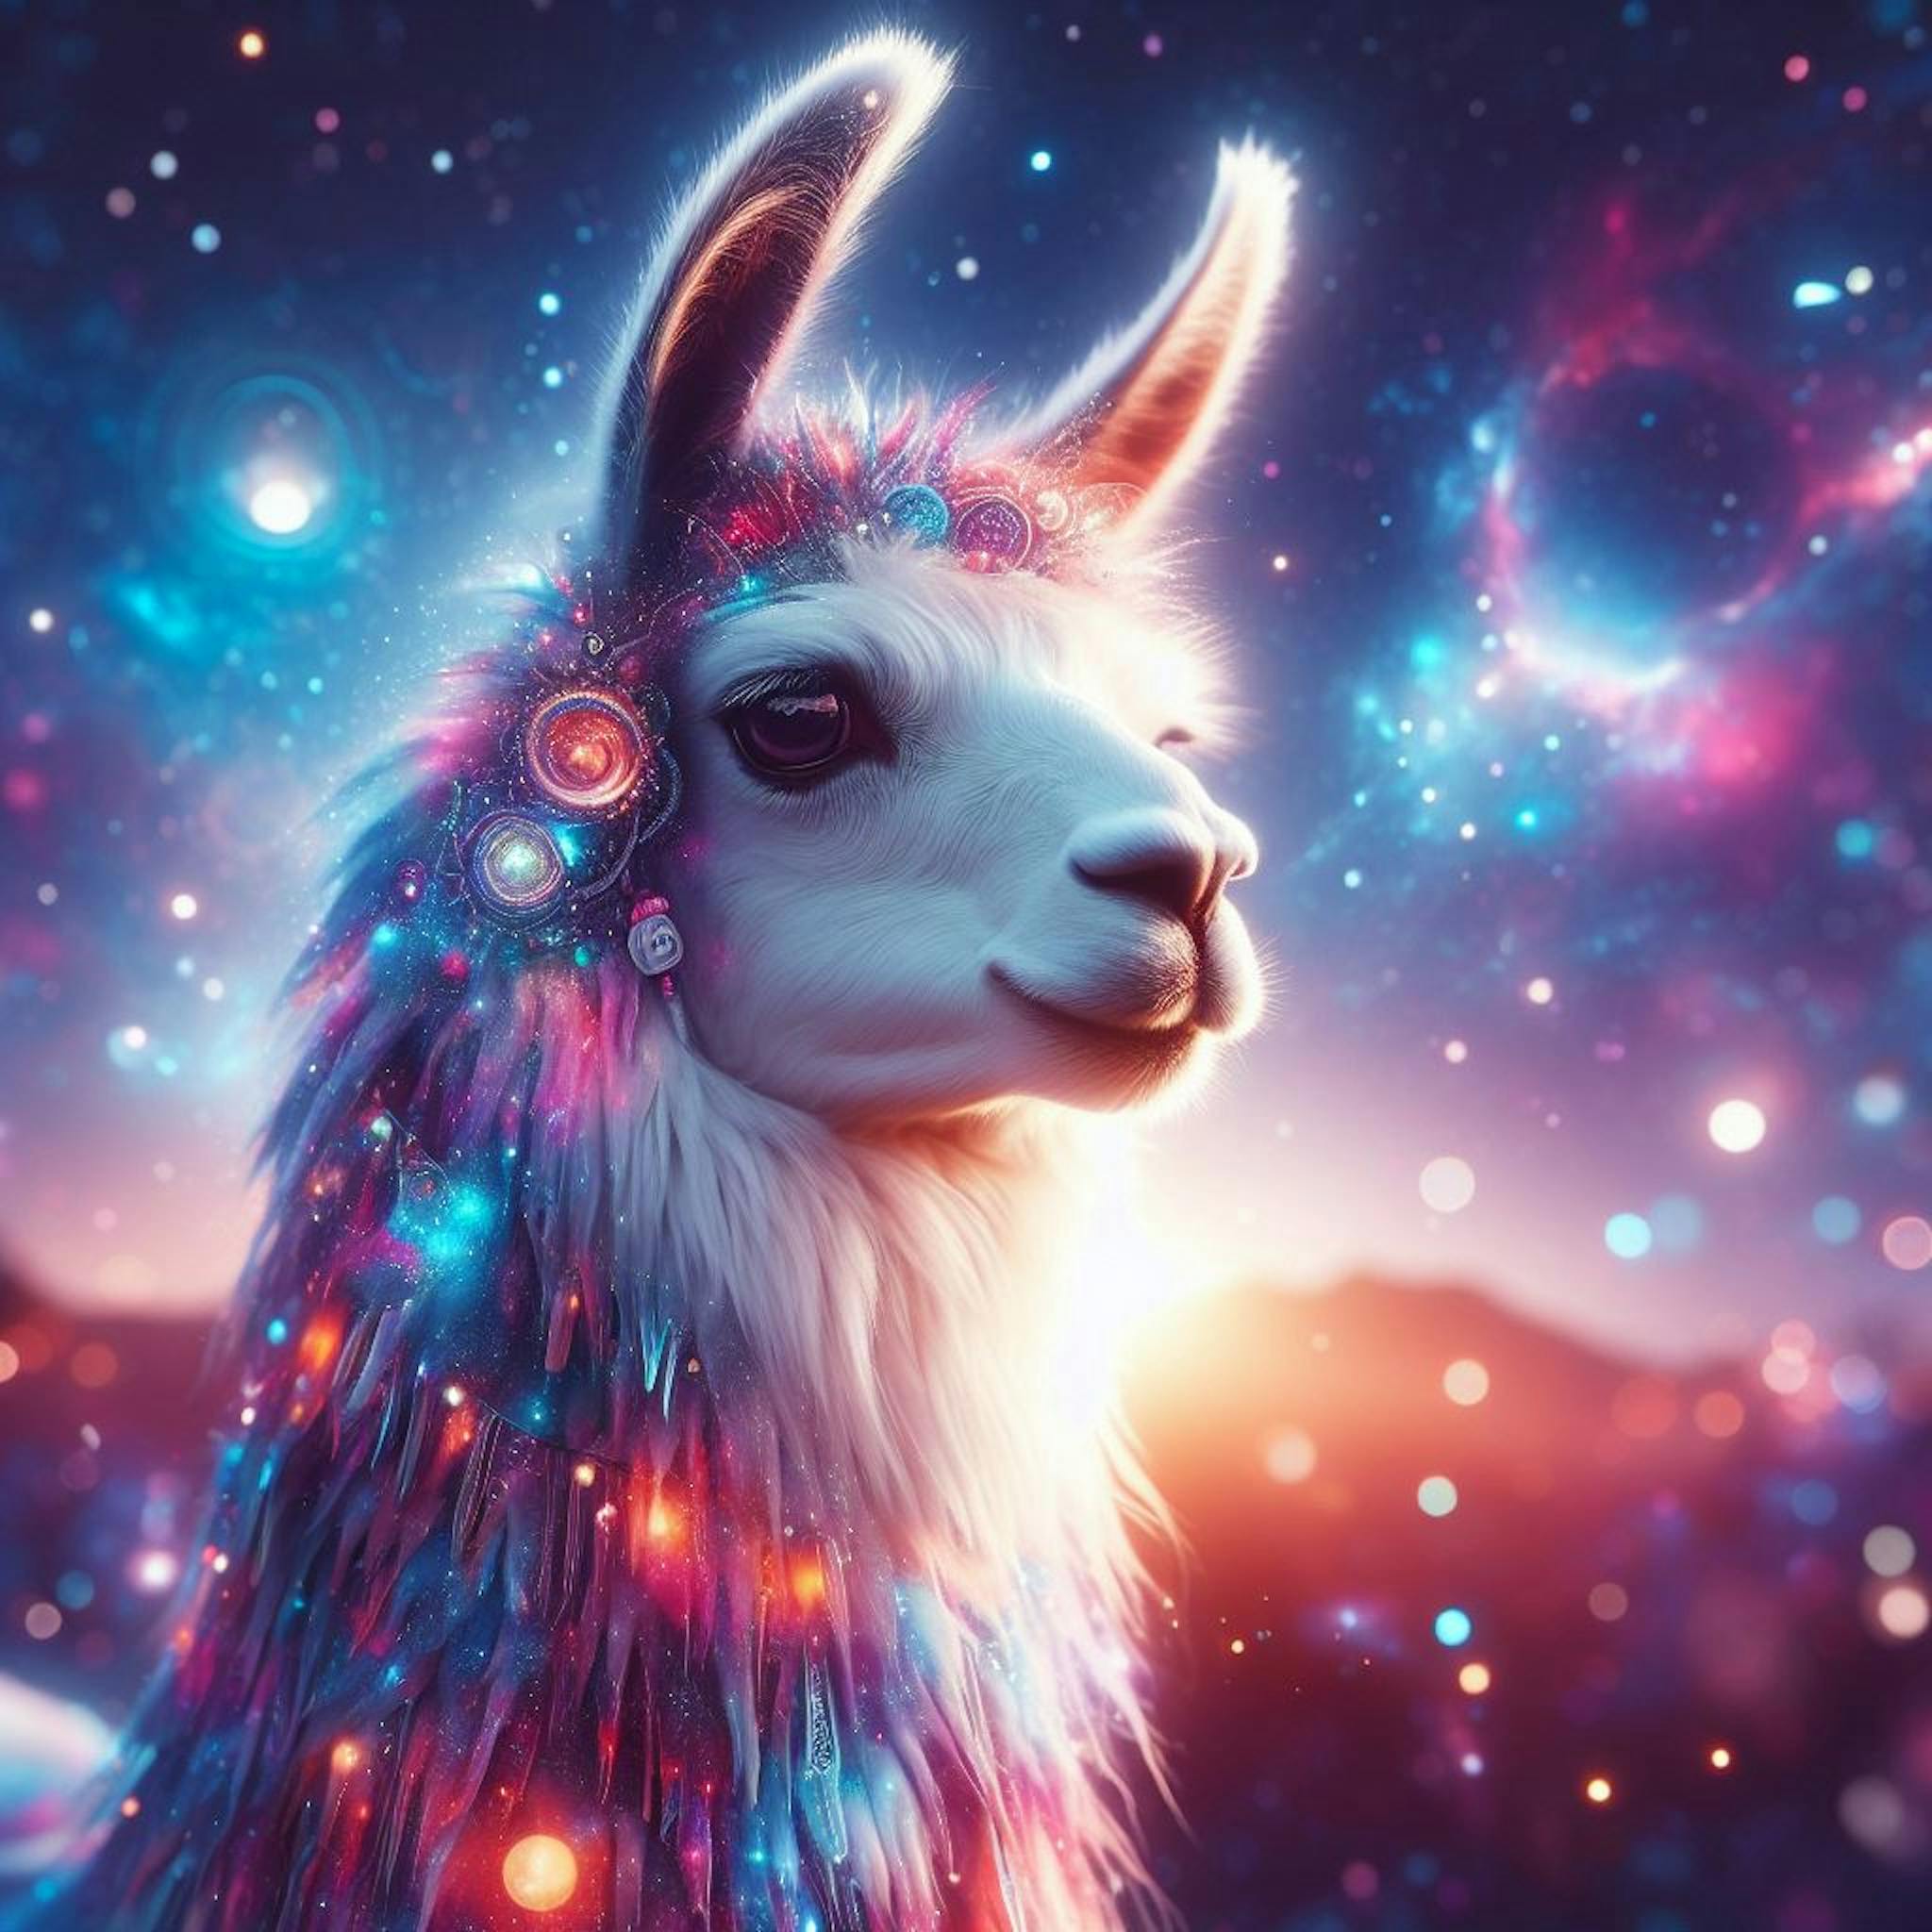 Now that's a spectacular Llama!